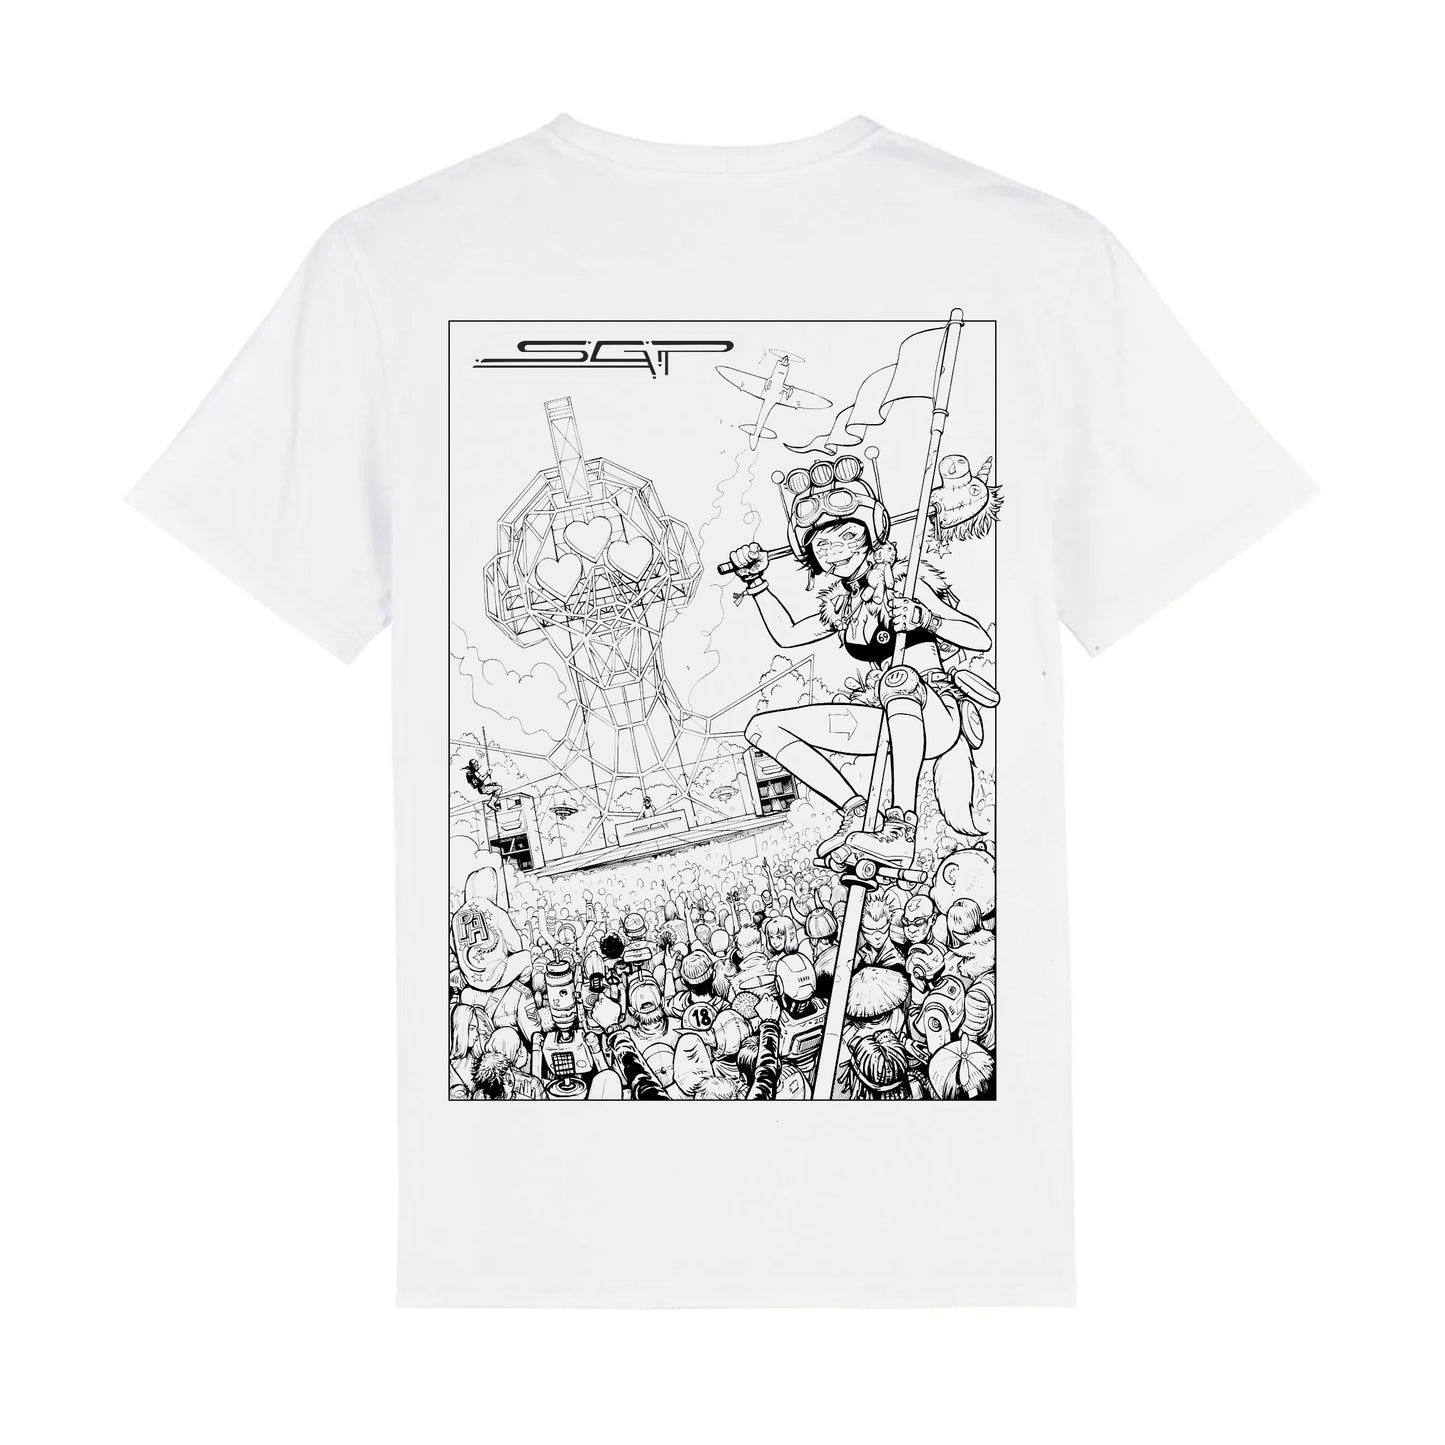 Secret Garden Party x Play Attention - A Stage Ahead T-Shirt (White / Unisex Fit)